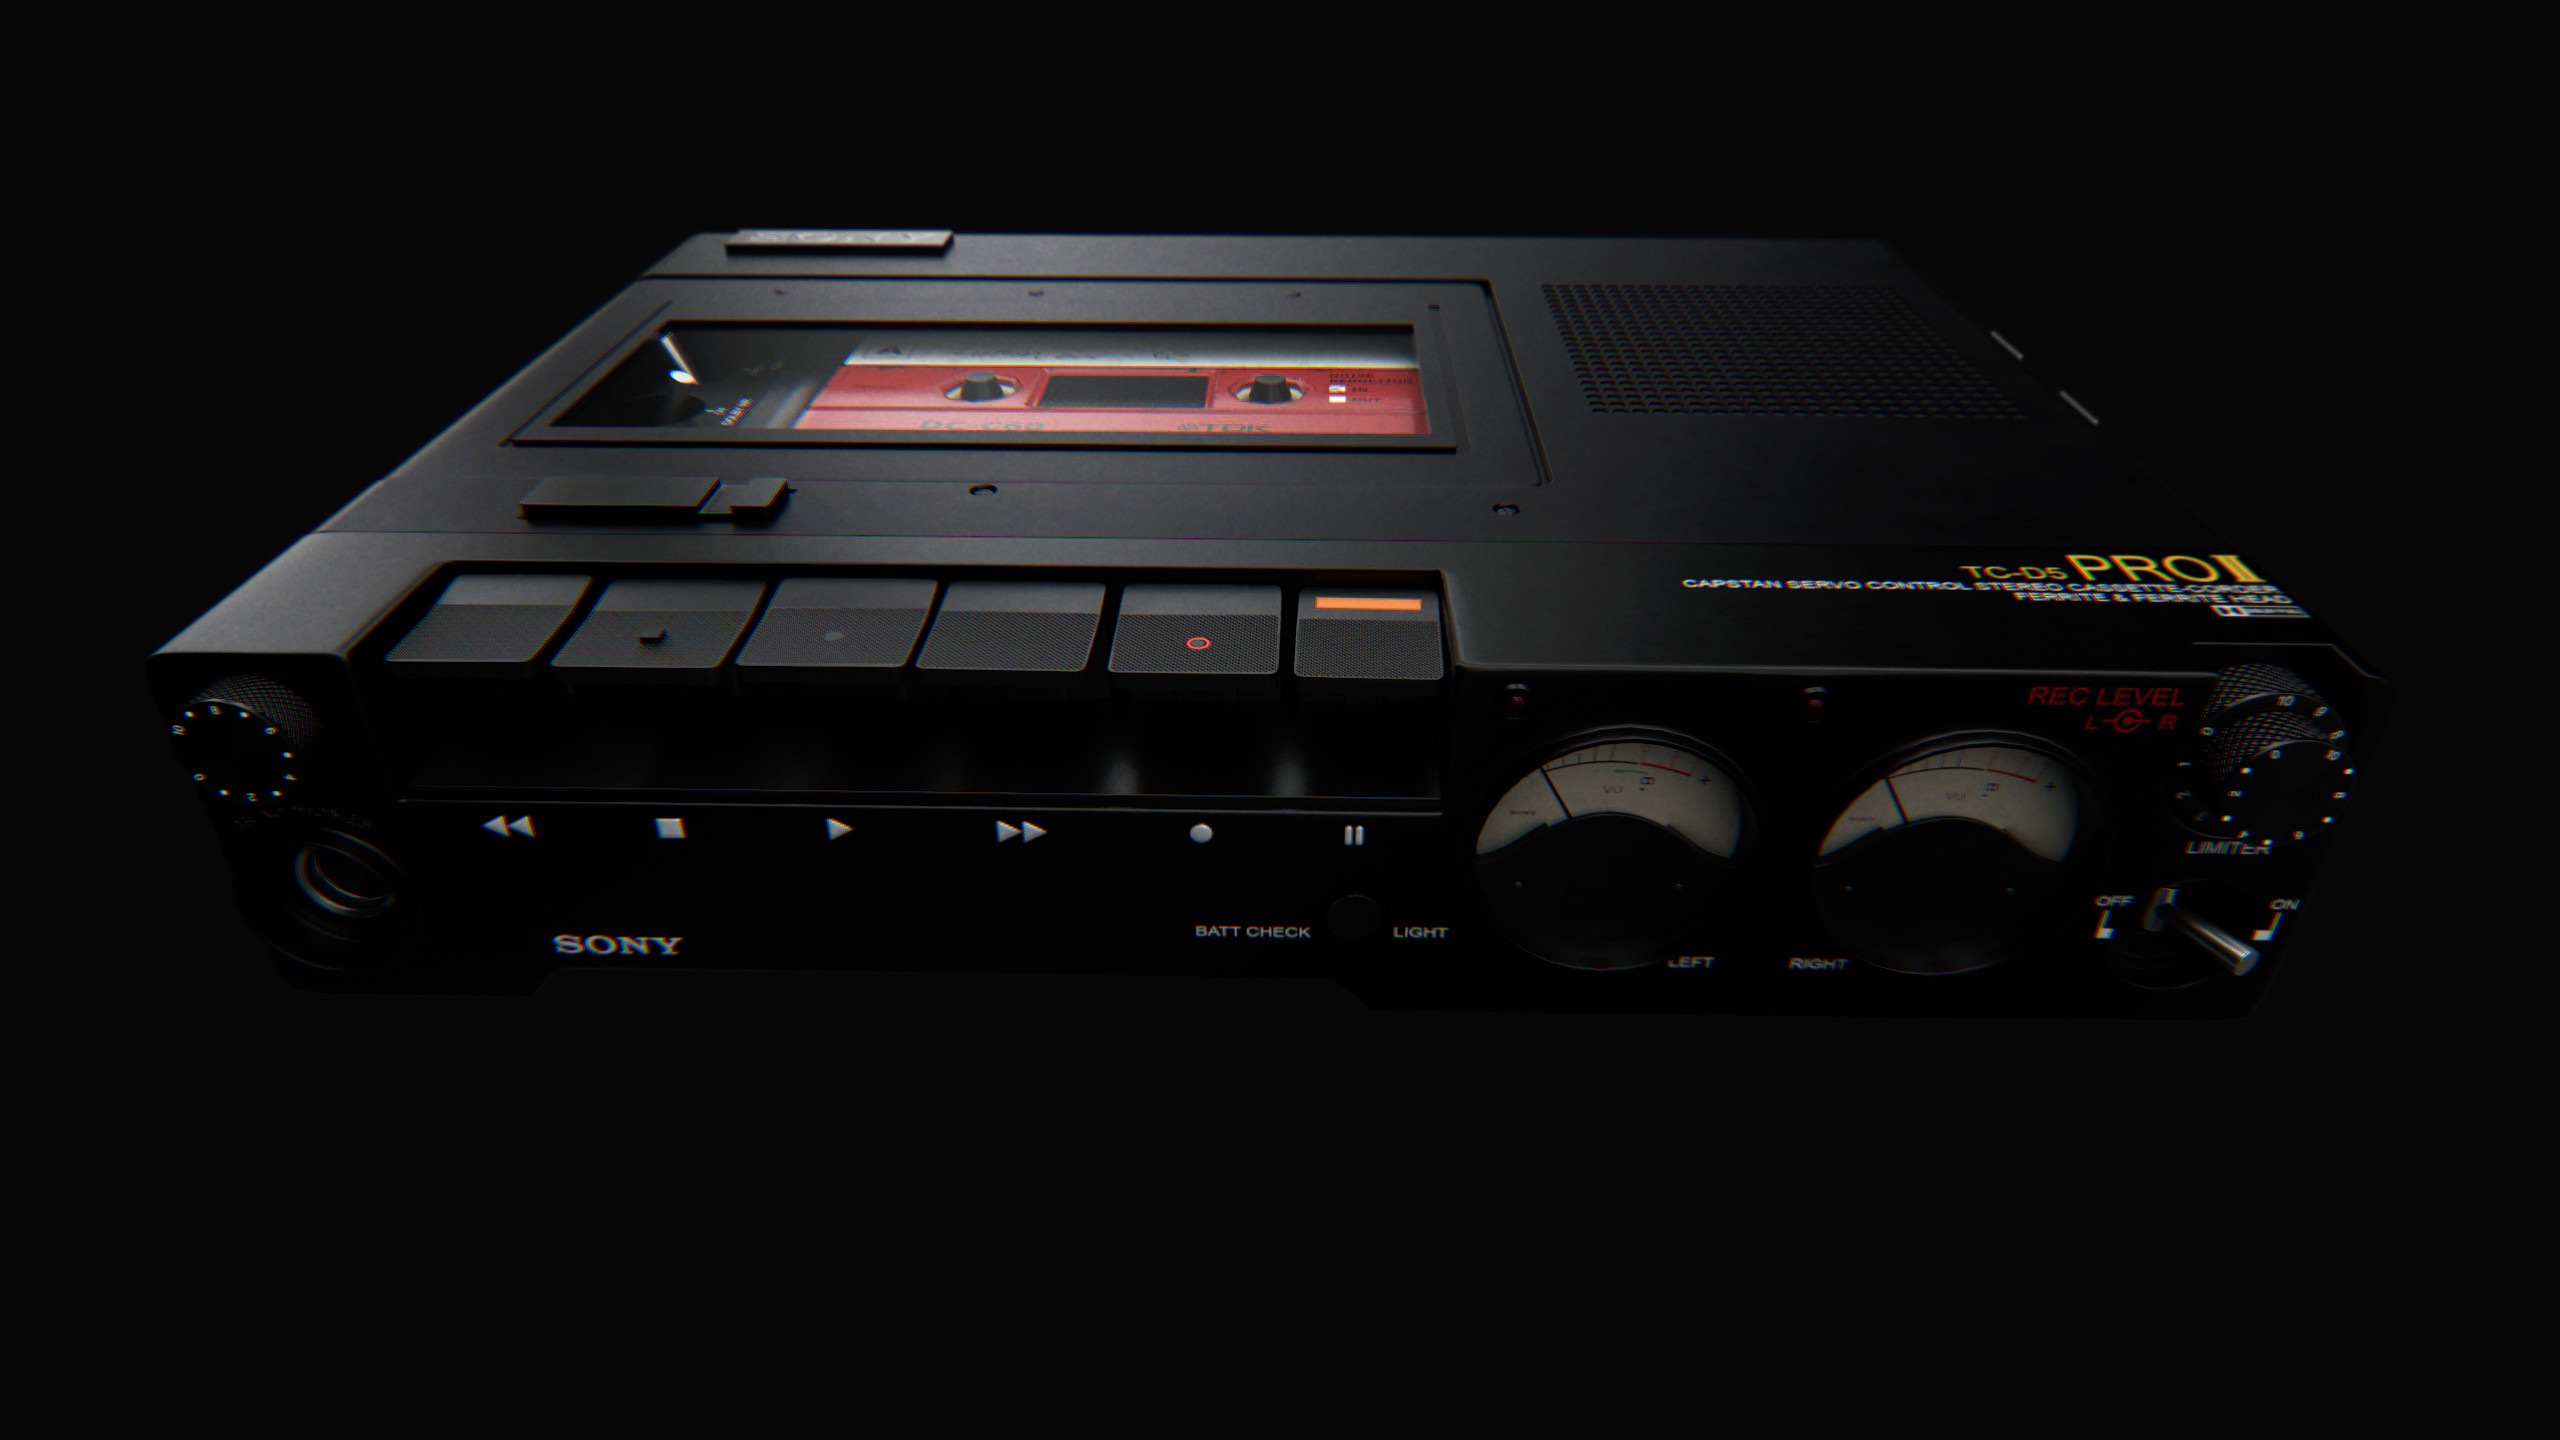 Of thanks as well is the owner of the cassette tape, acquired freely from: https://www.cgtrader.com/items/487726/download-page
Reunwrapped with 3ds Max and retextured with Substance Painter 2.
